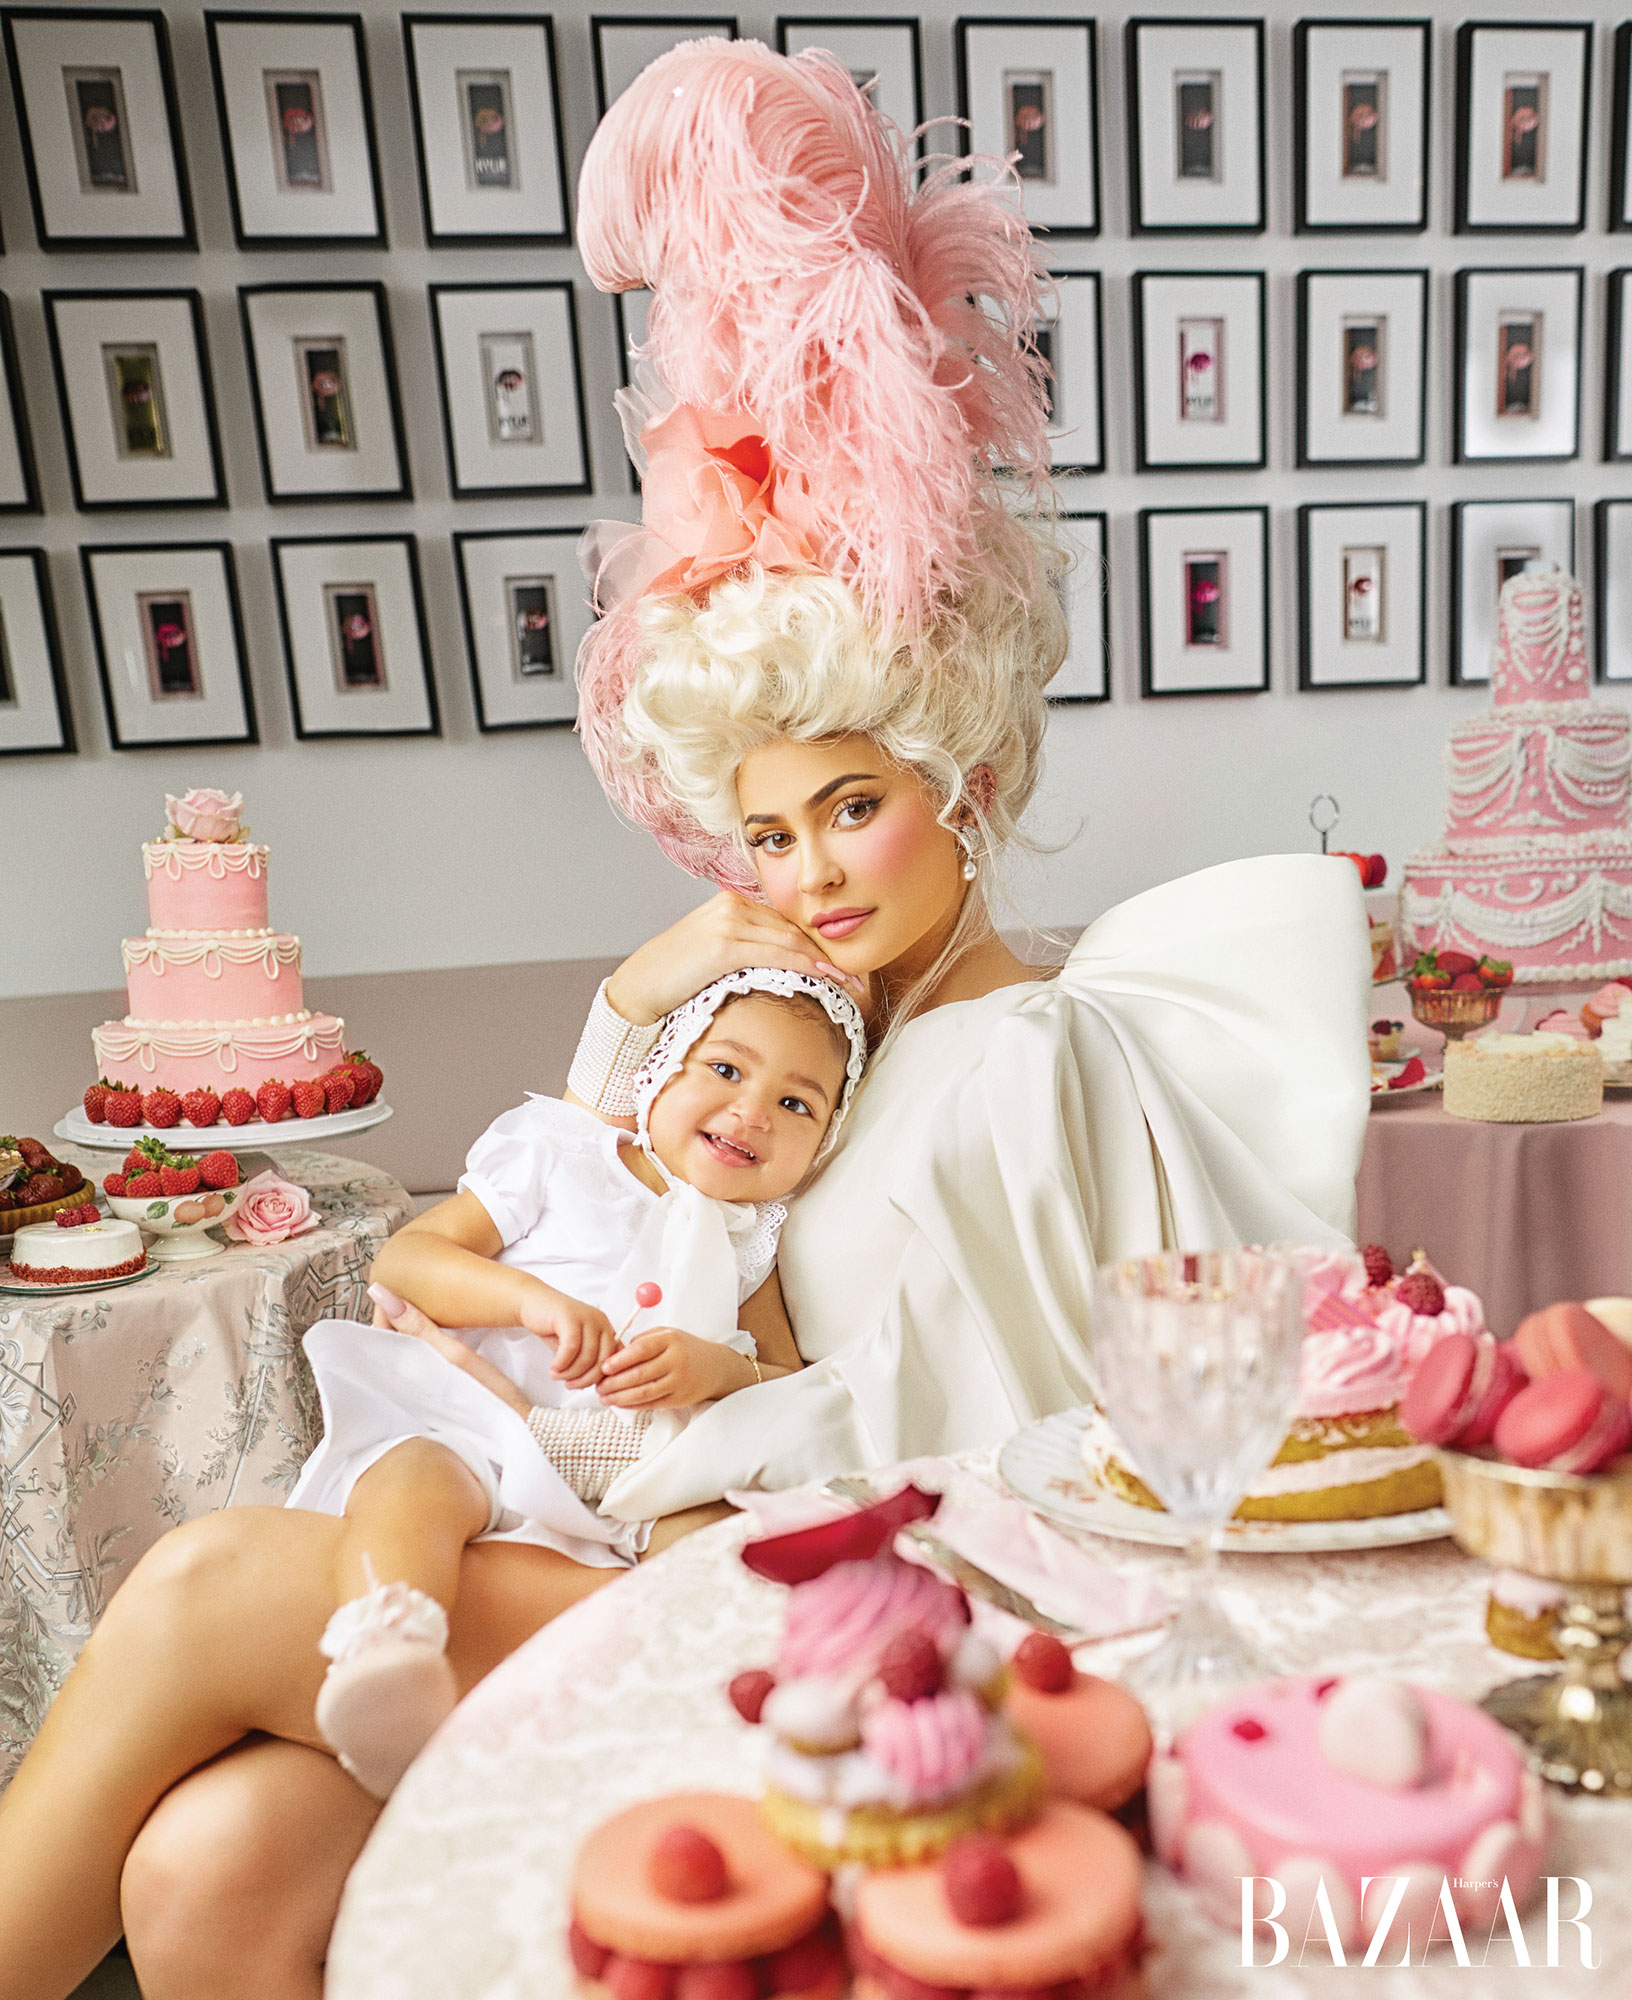 Stormi Webster's StormiWorld 2nd Birthday Party Was Epic — See Photos!